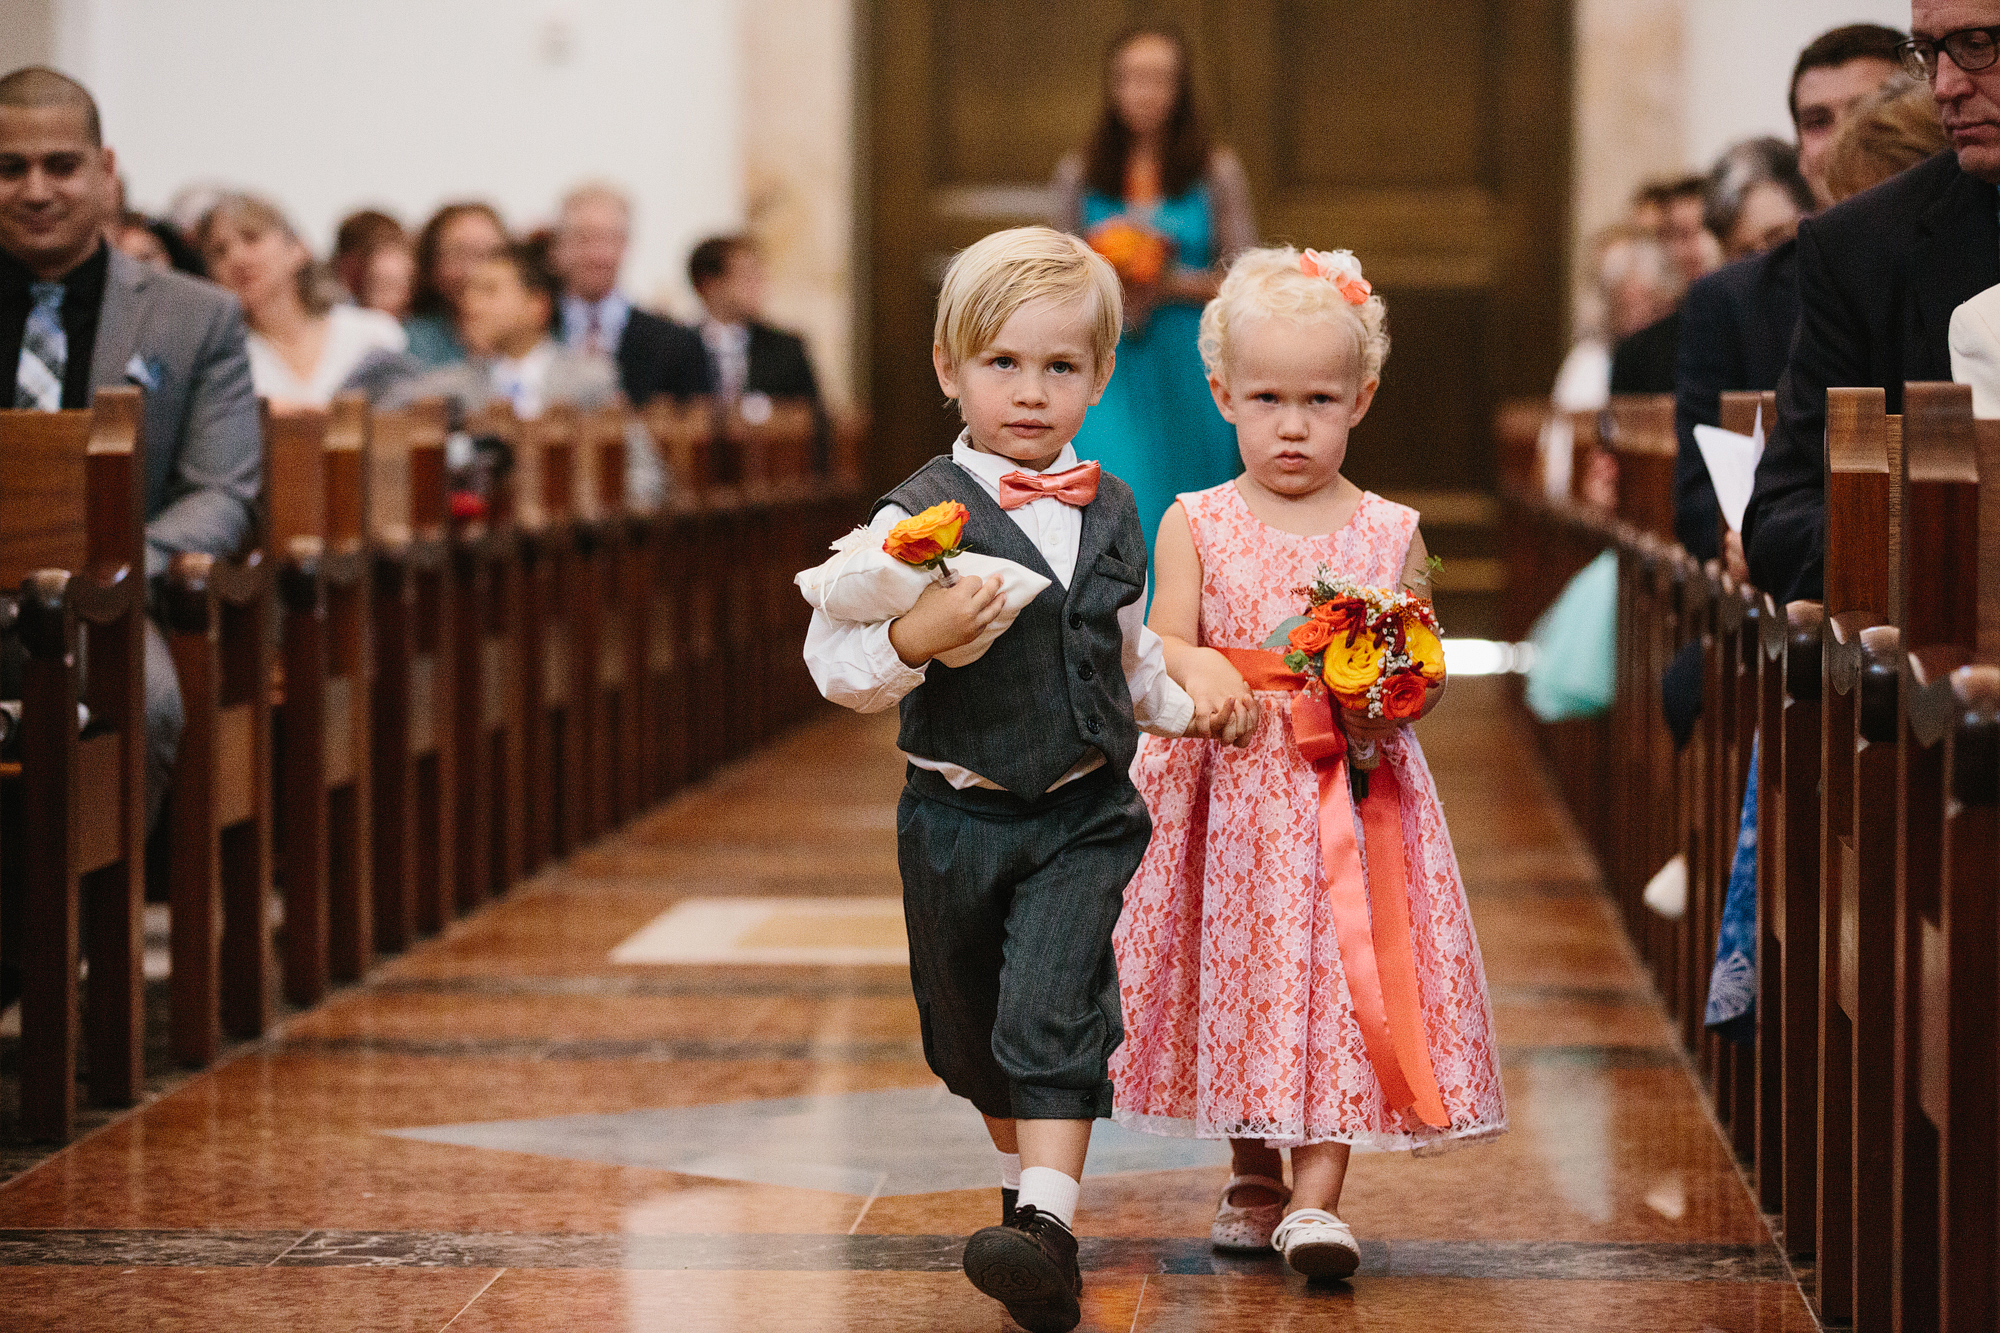 This is a photo of the ring bearer and the flower girl walking down the aisle.